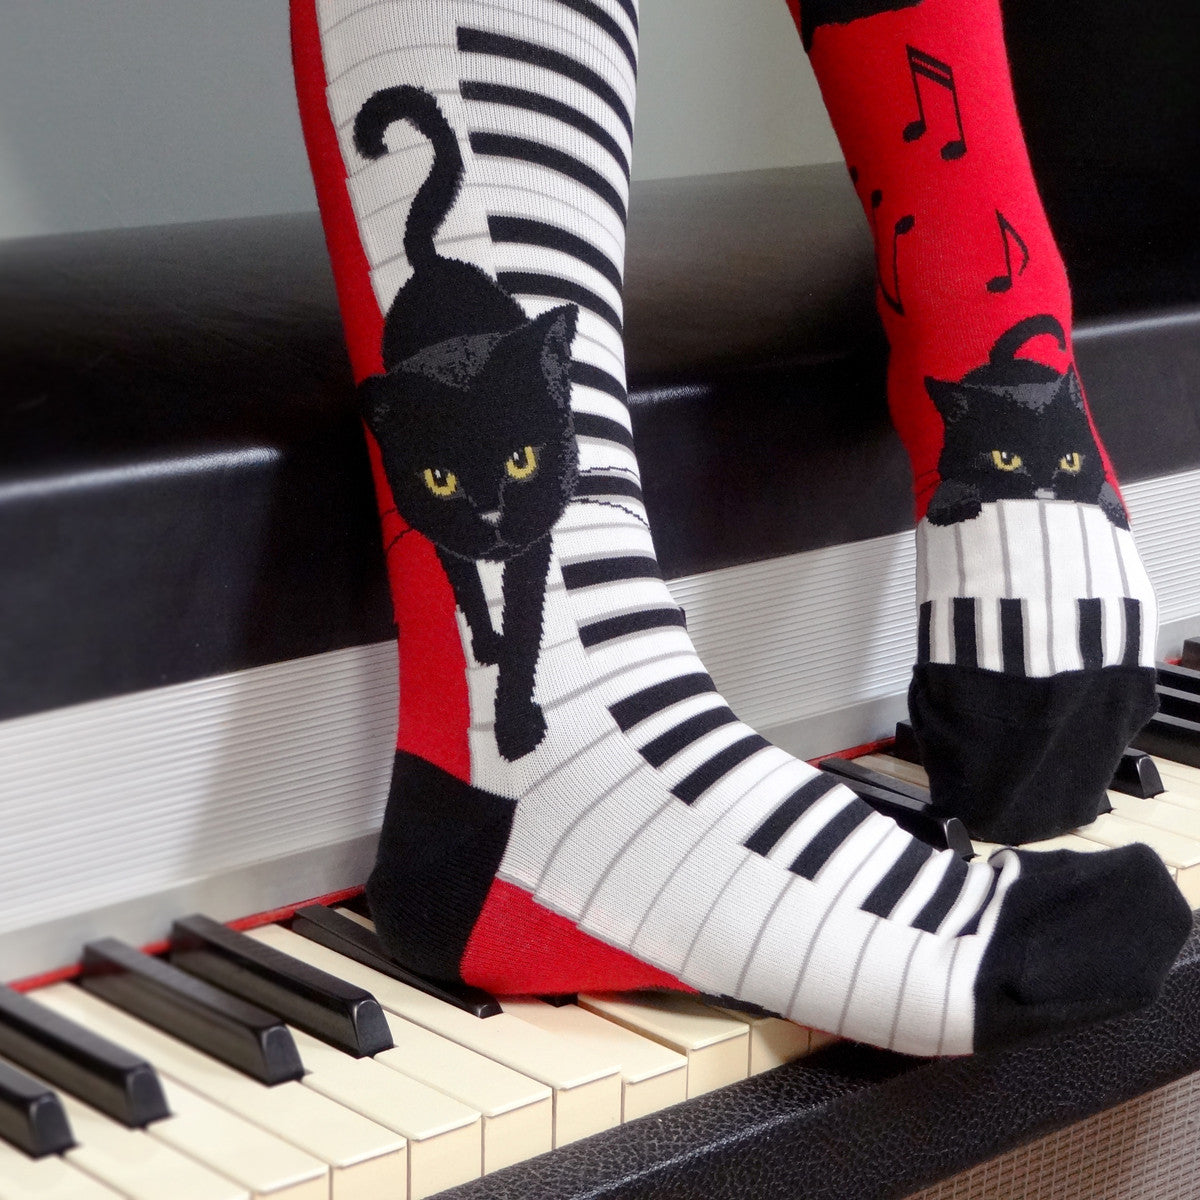 A black cat walks down piano keys while other cats play with music notes on these red knee socks for the music lover designed by sock brand ModSocks.